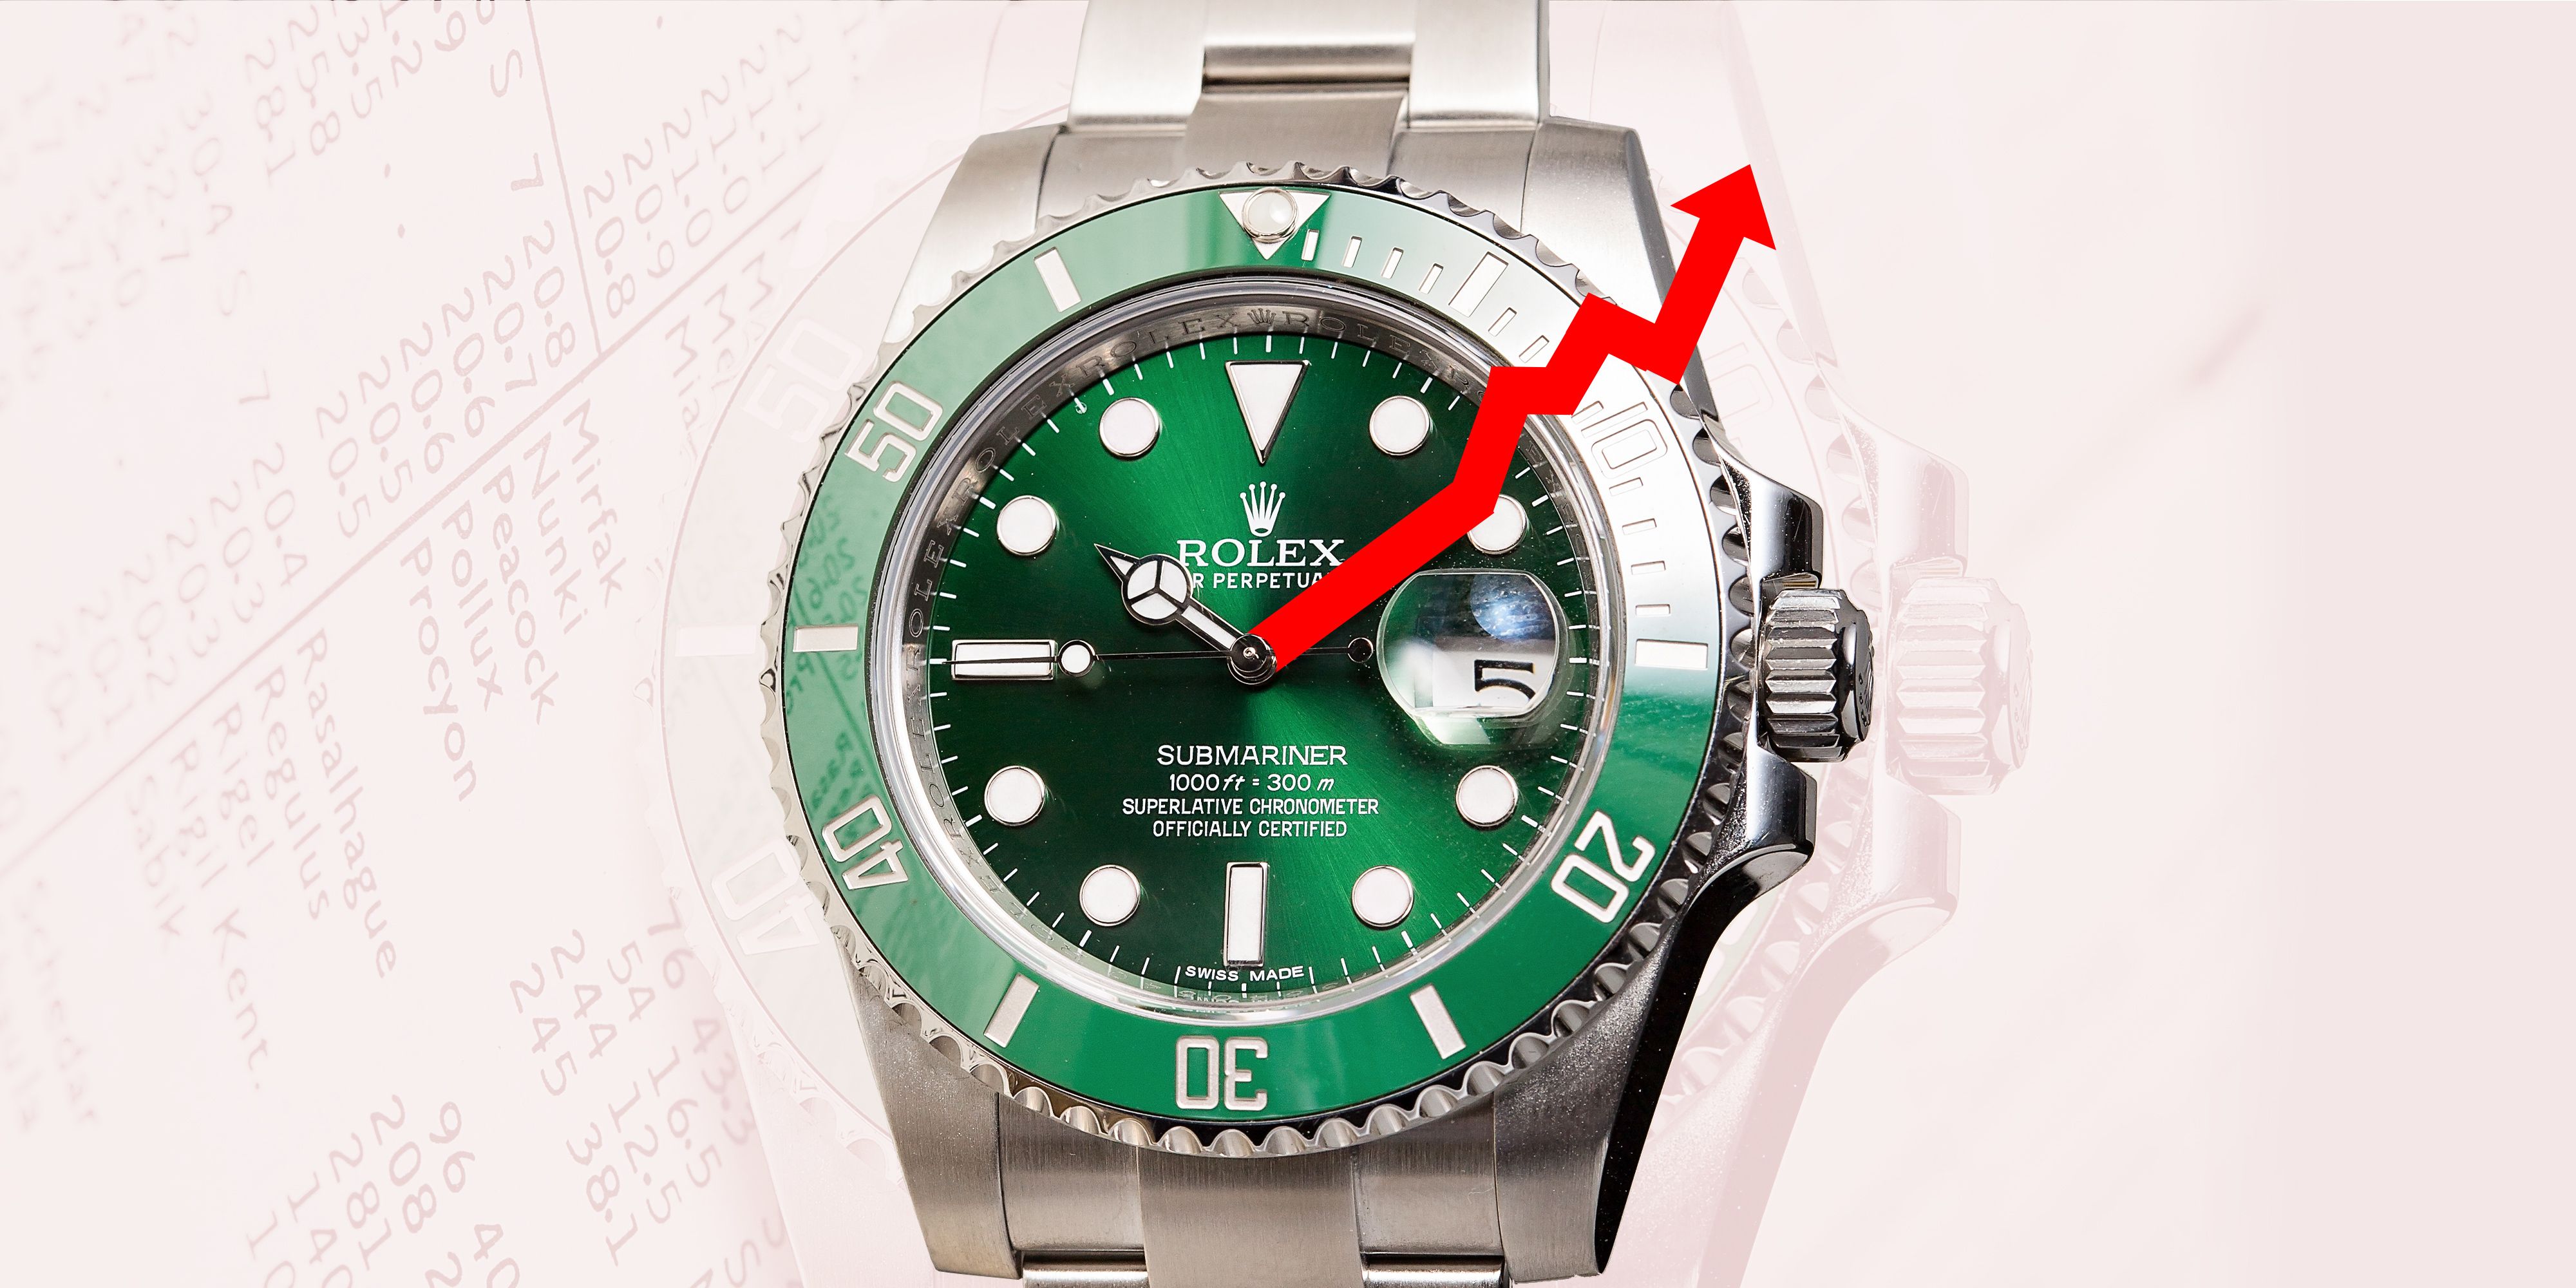 Vintage Rolex Prices Are Up Report on Vintage Values